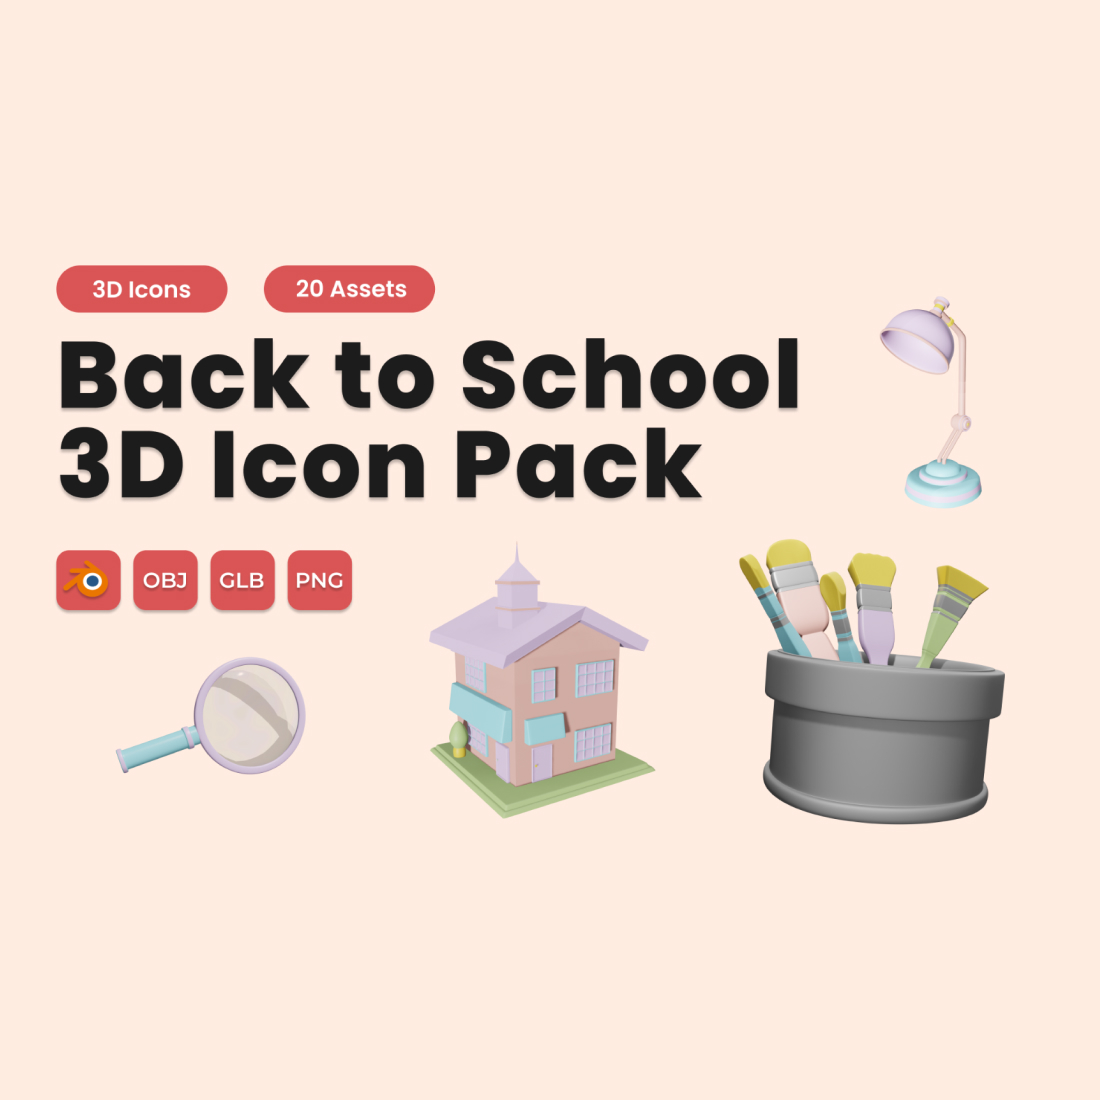 Back to School 3D Icon Pack Vol 2 preview image.